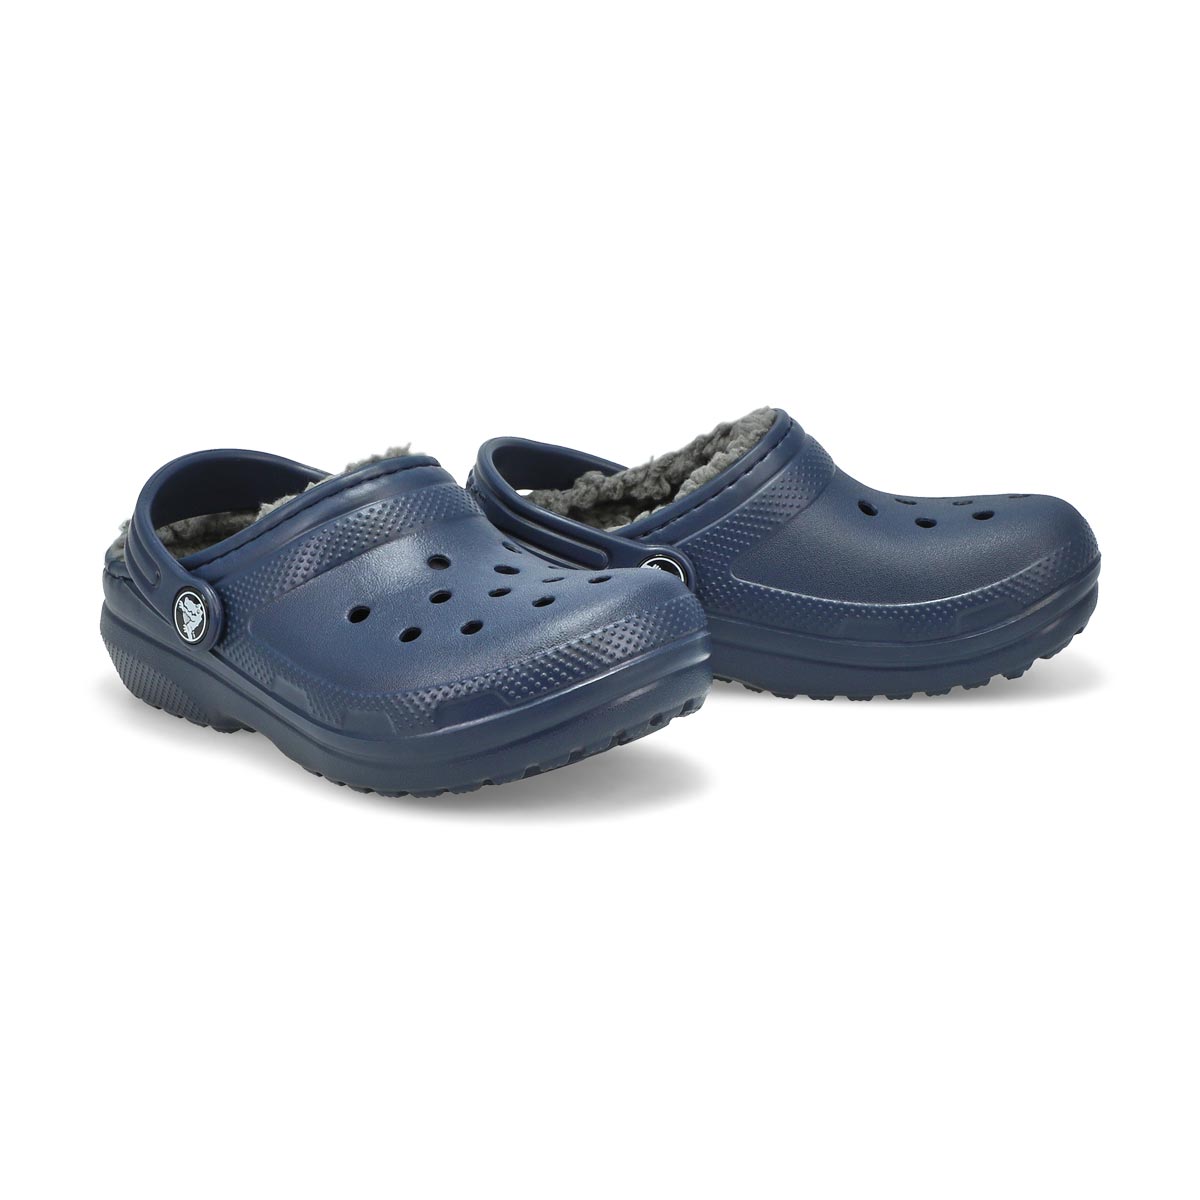 Kids' Classic Lined Comfort Clog - Navy/Charcoal